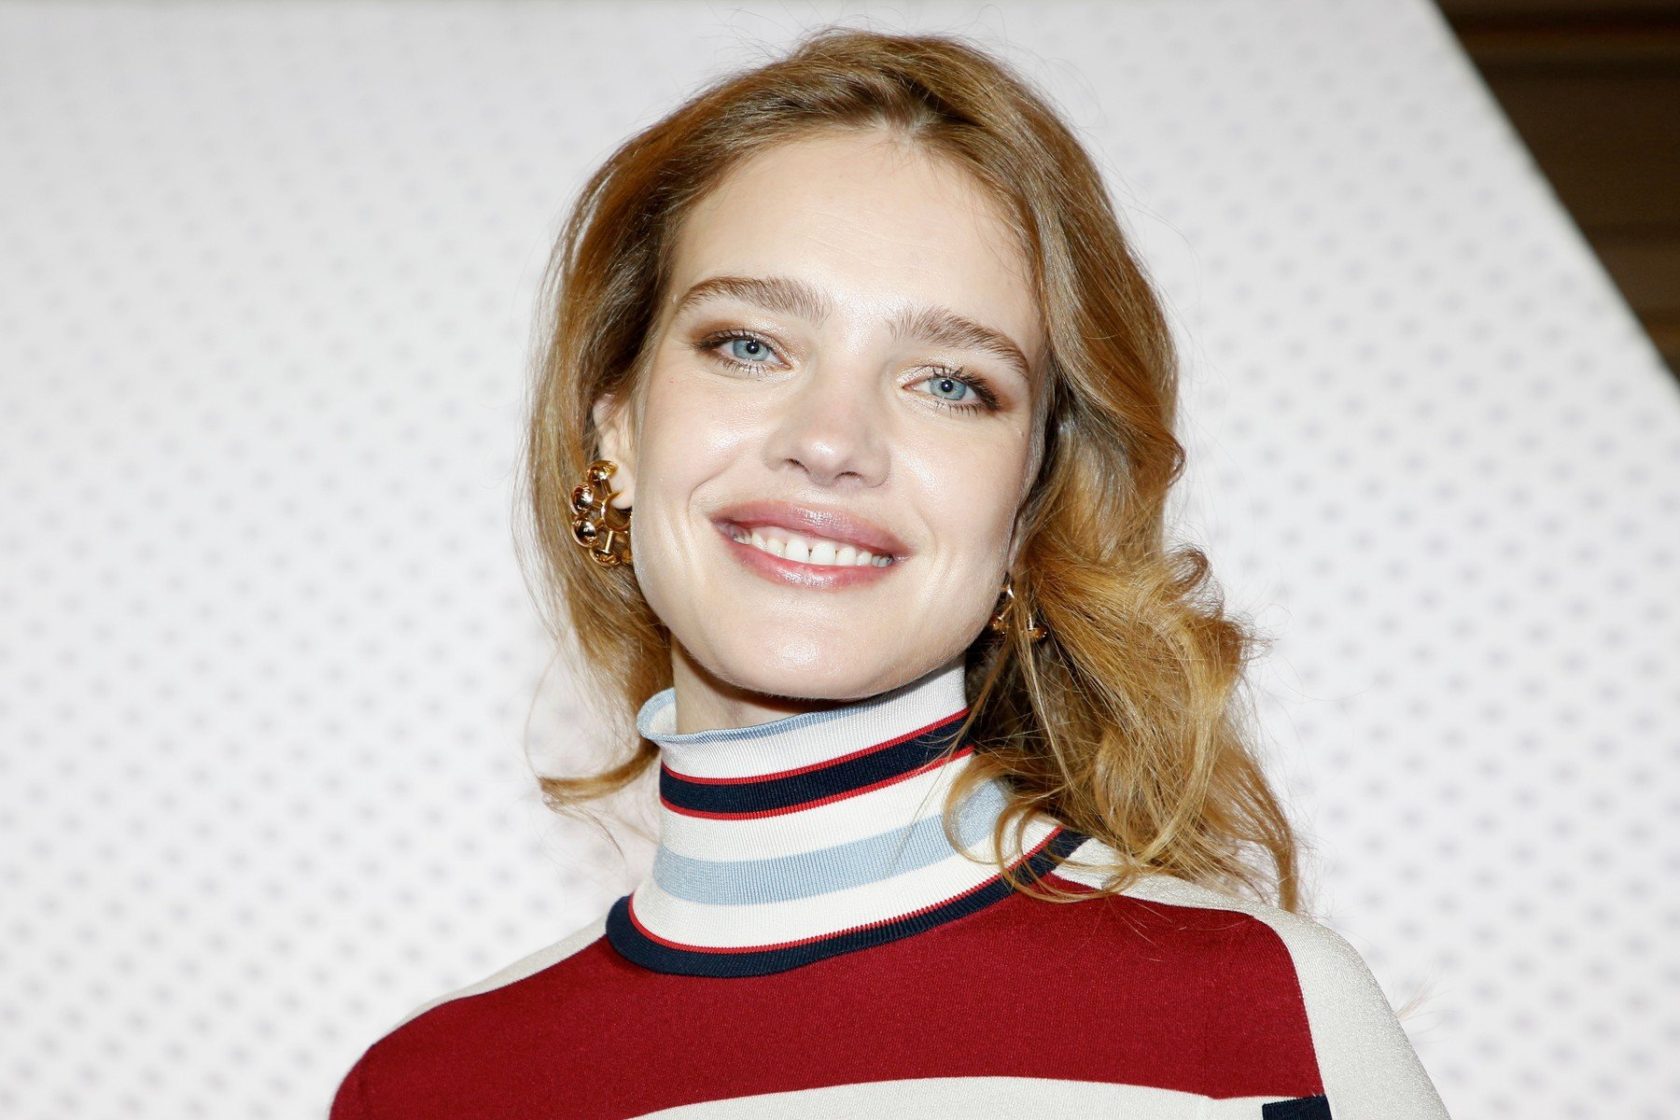 Russian model Natalia Vodianova during the presentation of the Louis Vuitton official case which will be used to carry the FIFA Russia 2018 World Cup trophy-at the Louis Vuitton headquarters in Asničres-sur-Seine on May 17, 2018 / France